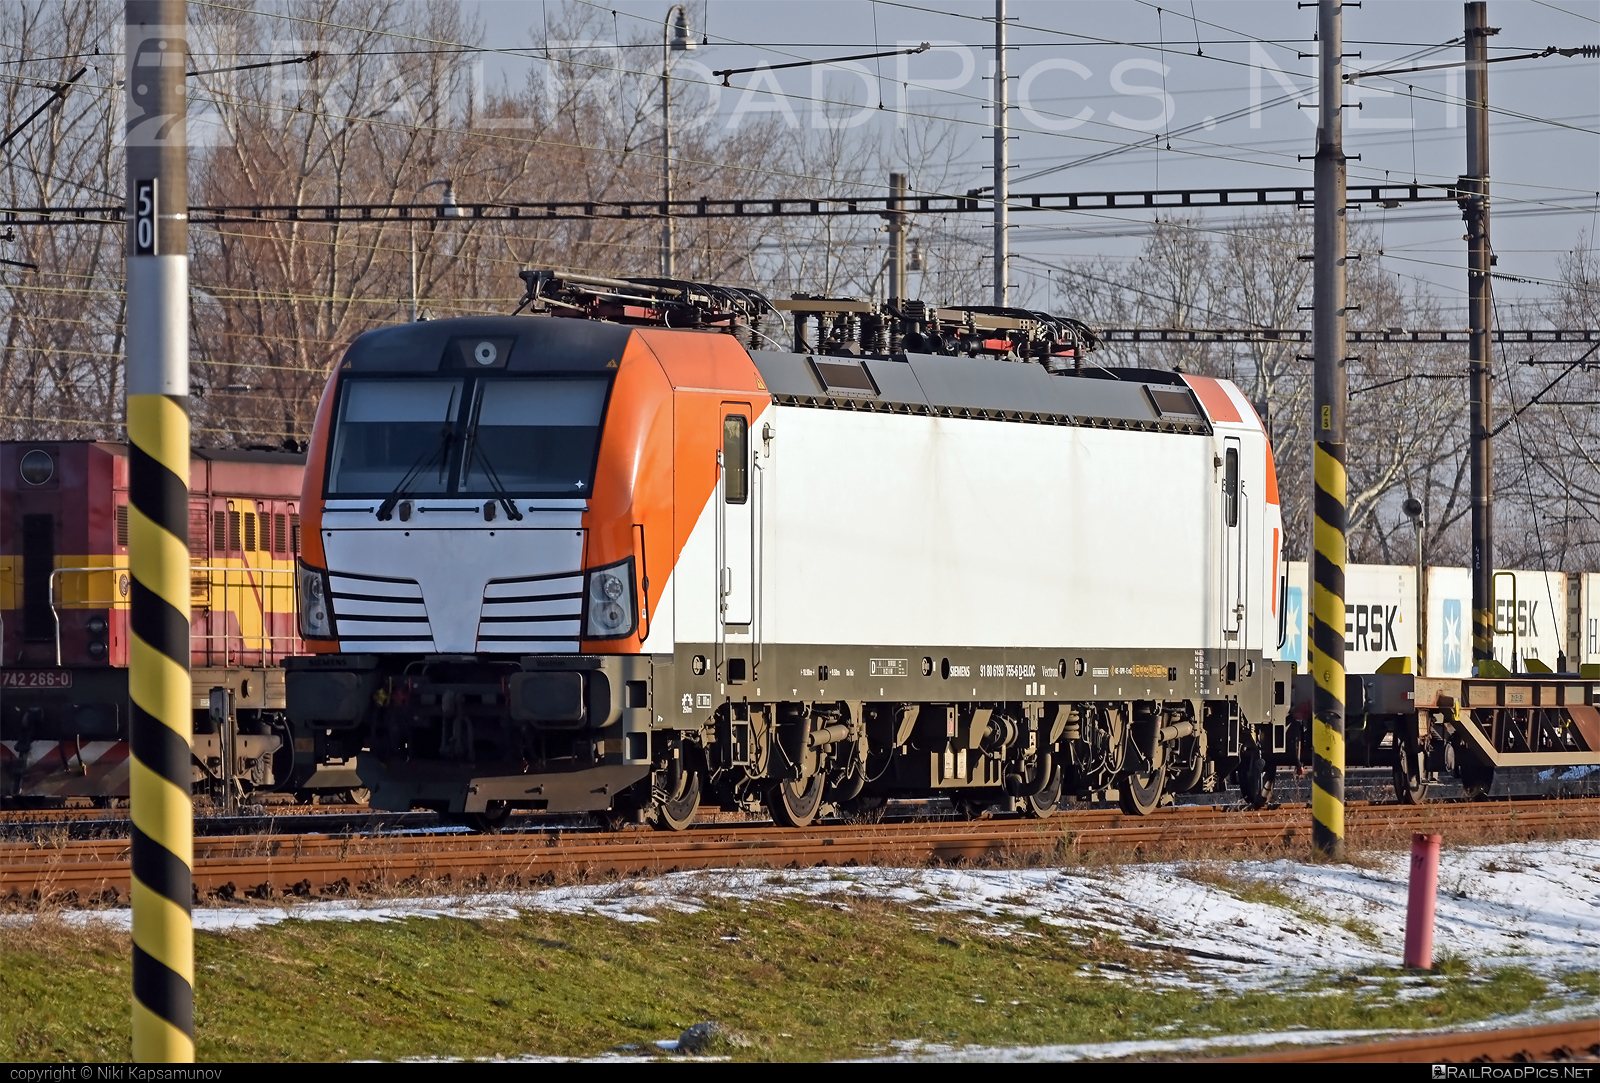 Siemens Vectron MS - 193 755 operated by PKP CARGO INTERNATIONAL a.s. #ell #ellgermany #eloc #europeanlocomotiveleasing #pkpcargo #pkpcargointernational #pkpcargointernationalas #siemens #siemensvectron #siemensvectronms #vectron #vectronms